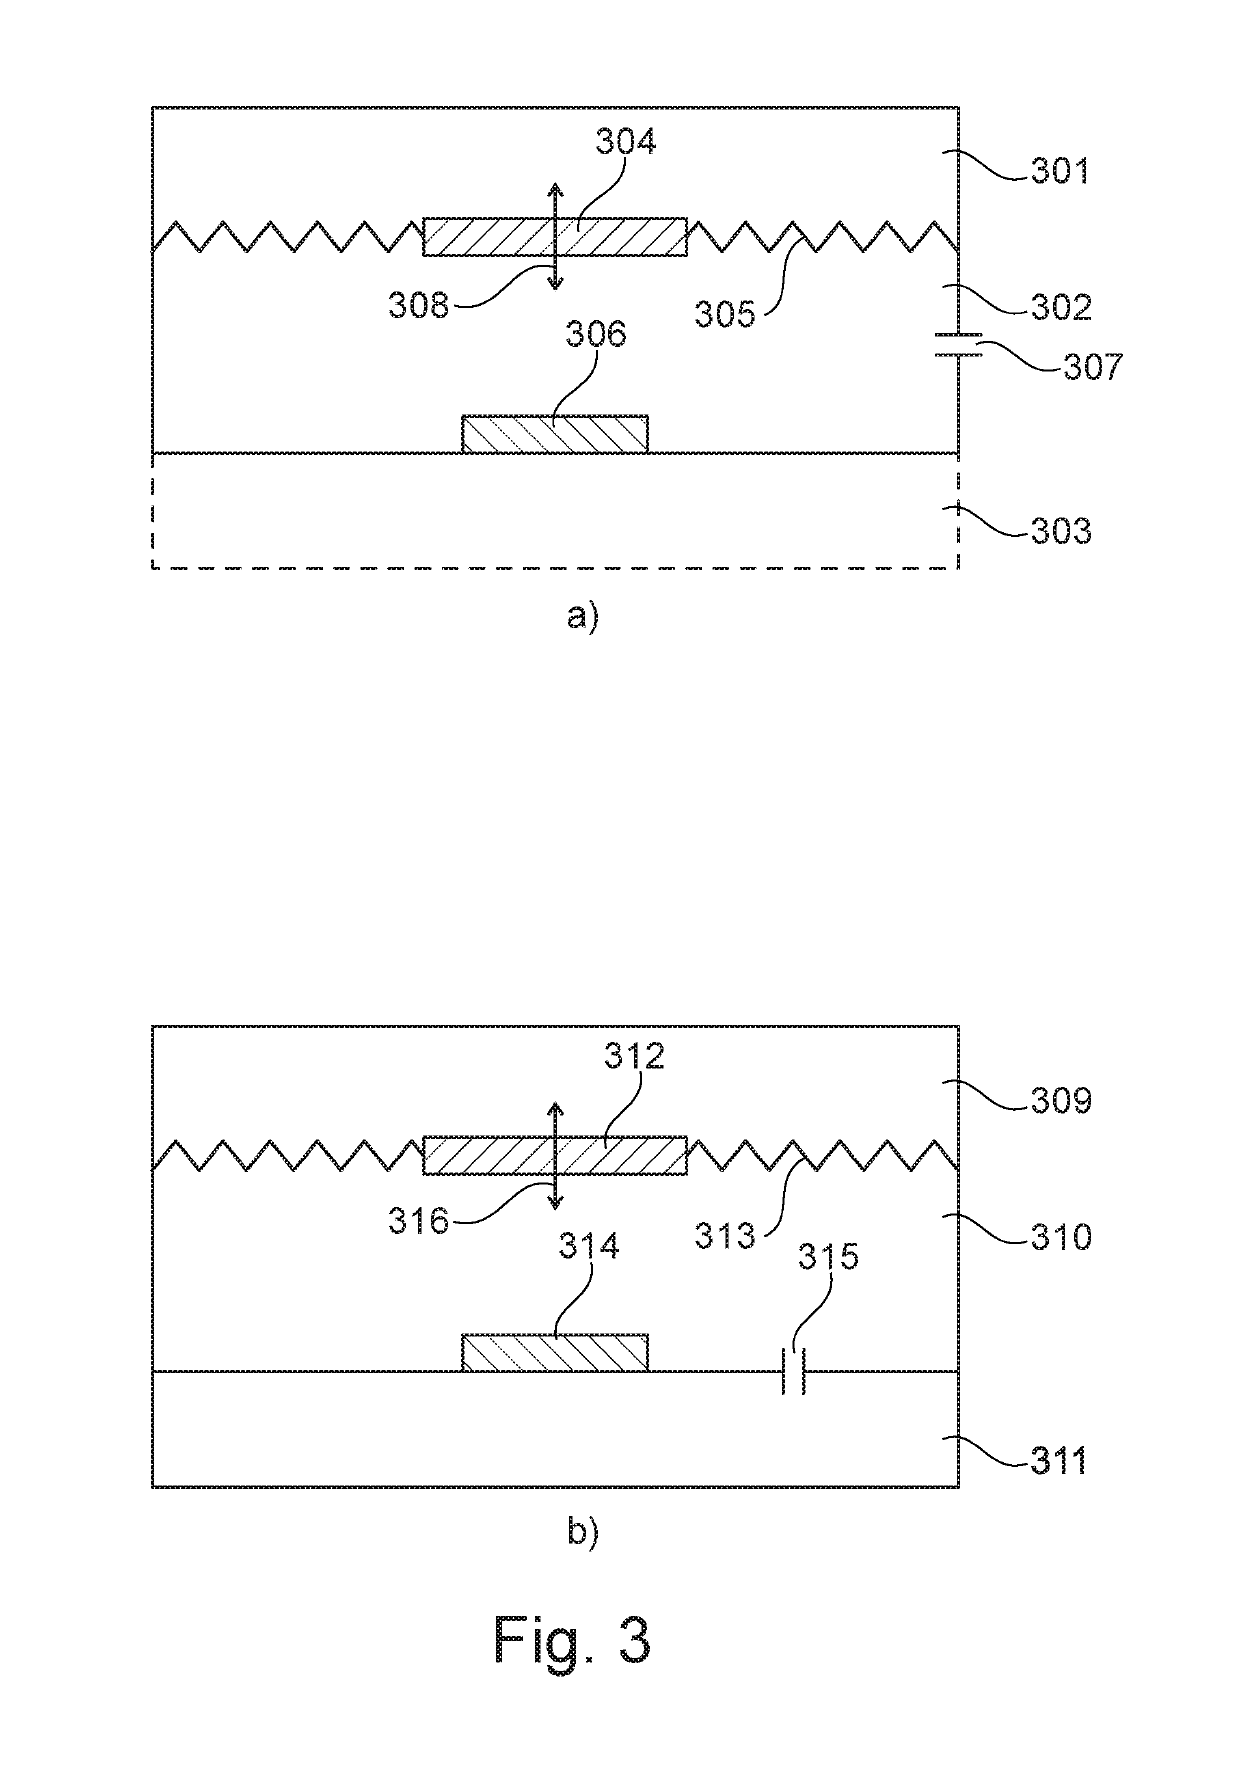 Vibration sensor with low-frequency roll-off response curve